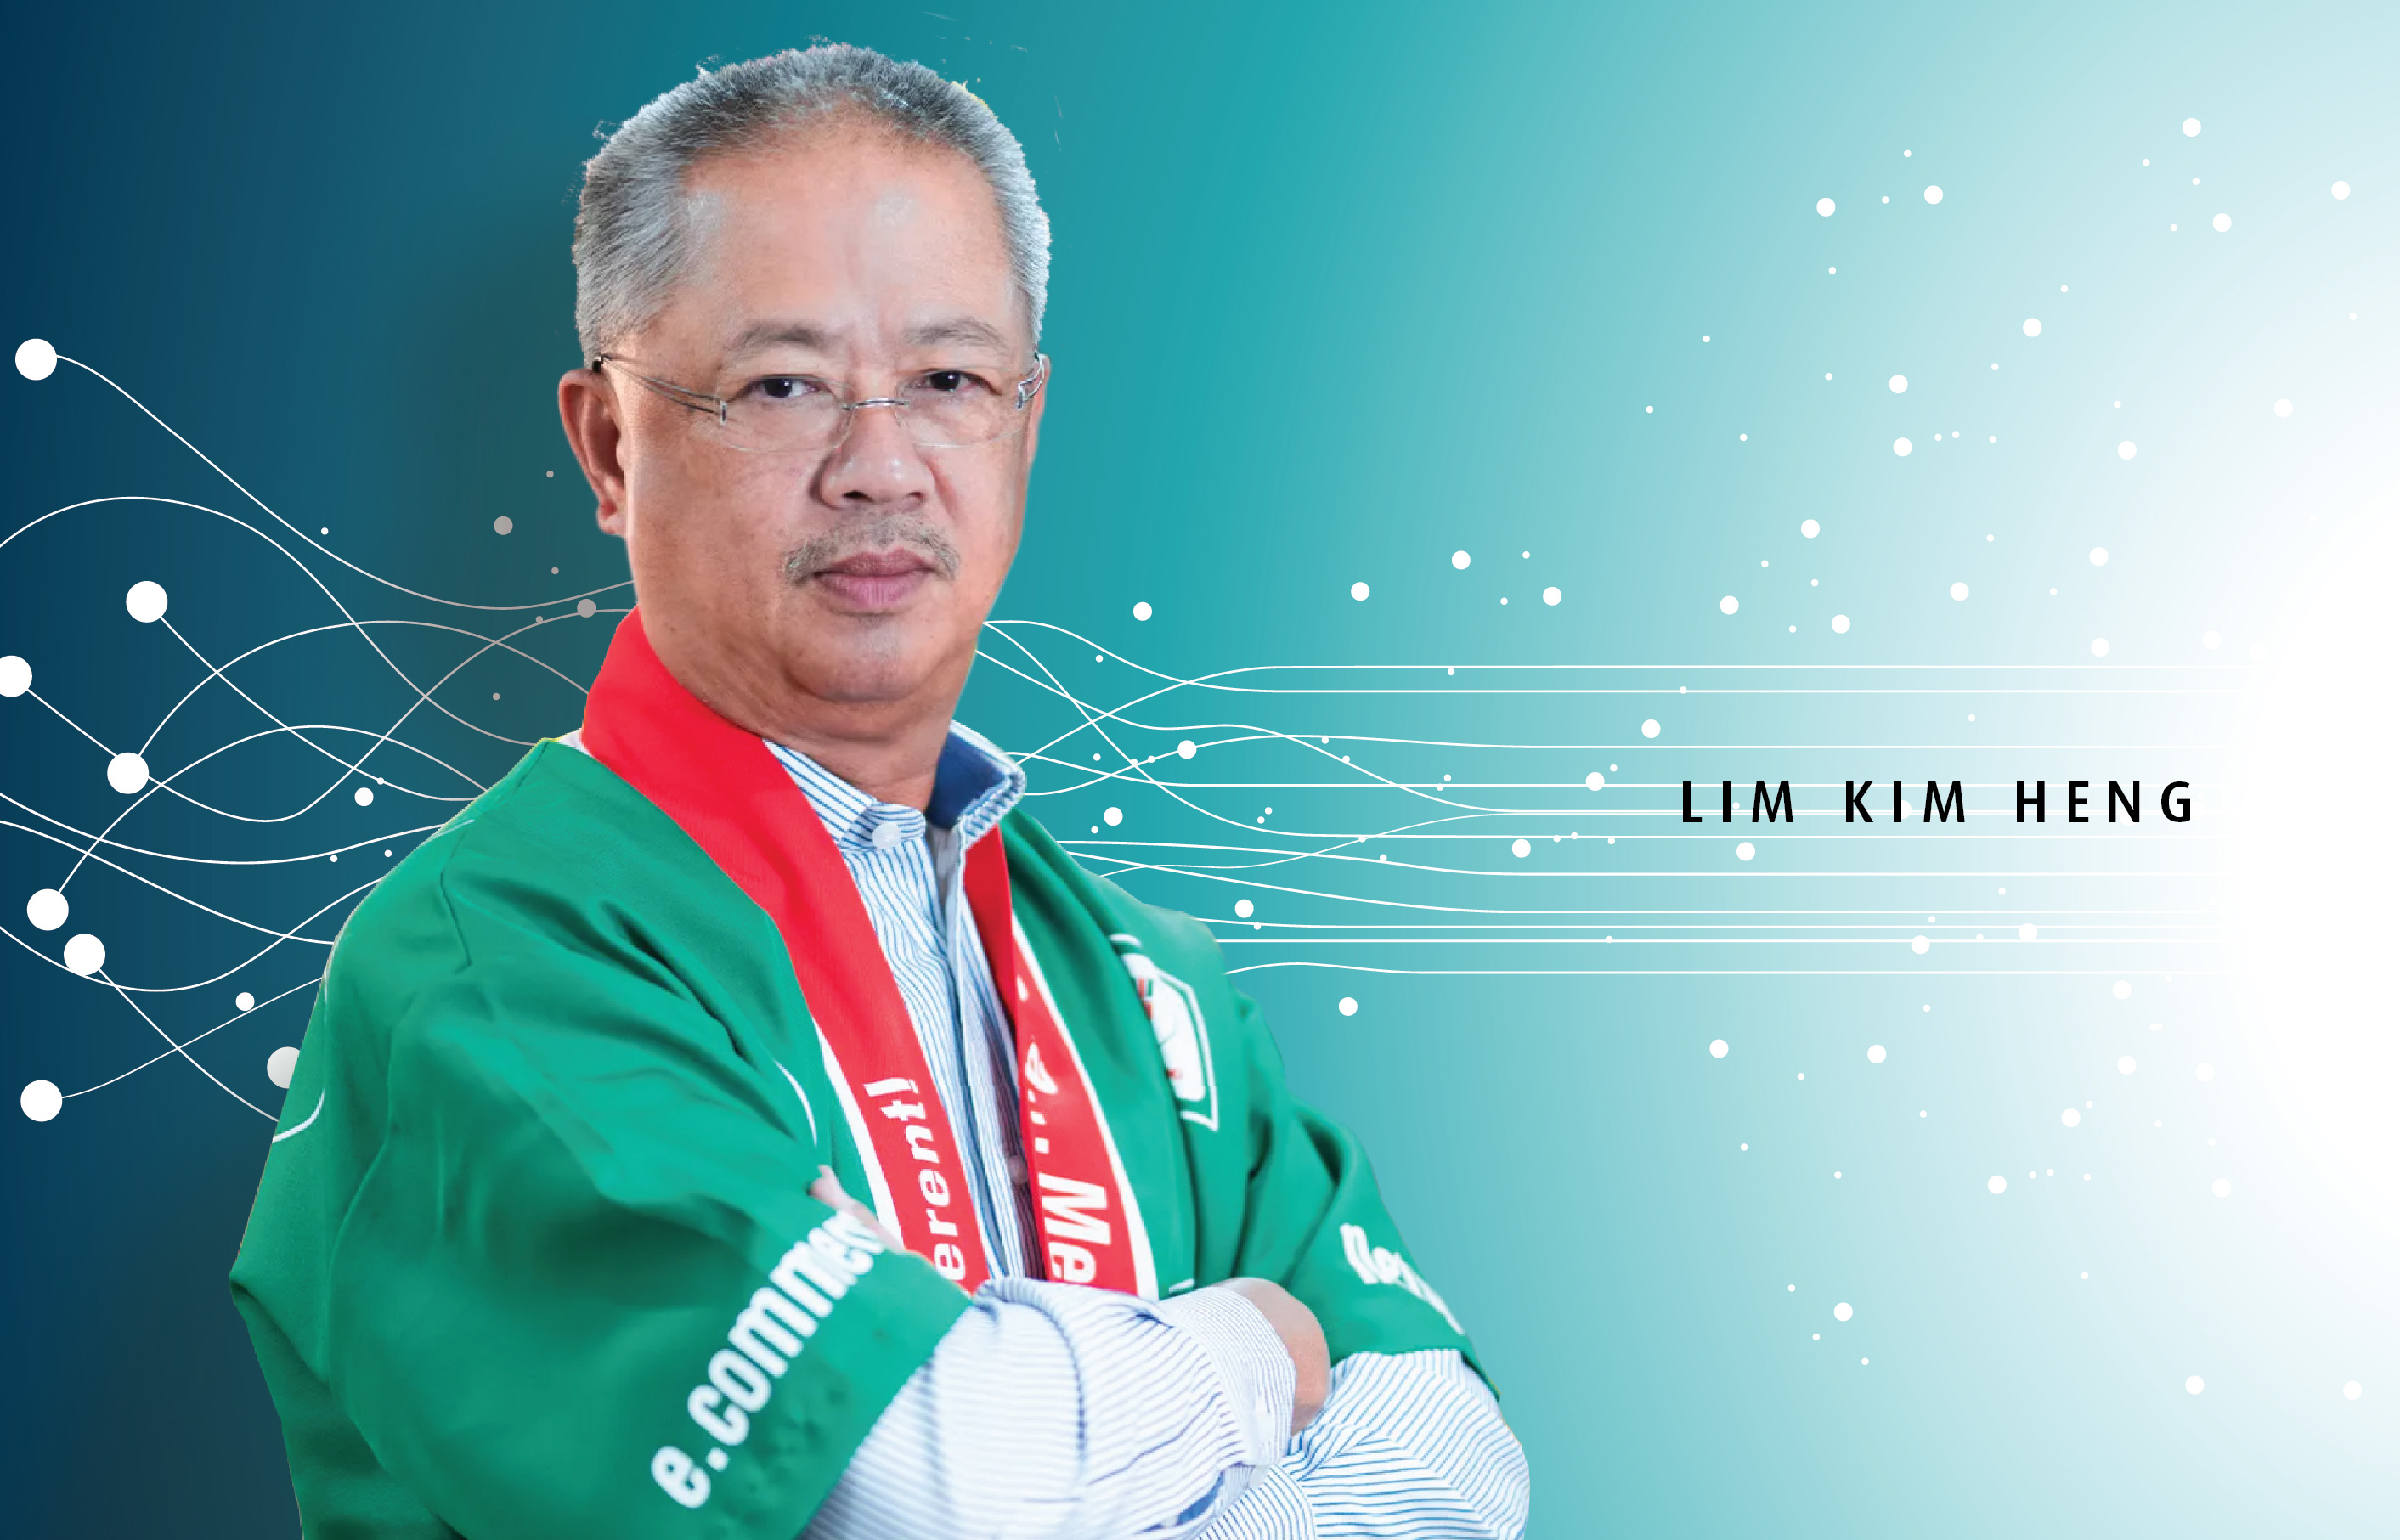 Lim brothers built up Senheng over 30 years to become the leading consumer electronics retailer in Malaysia